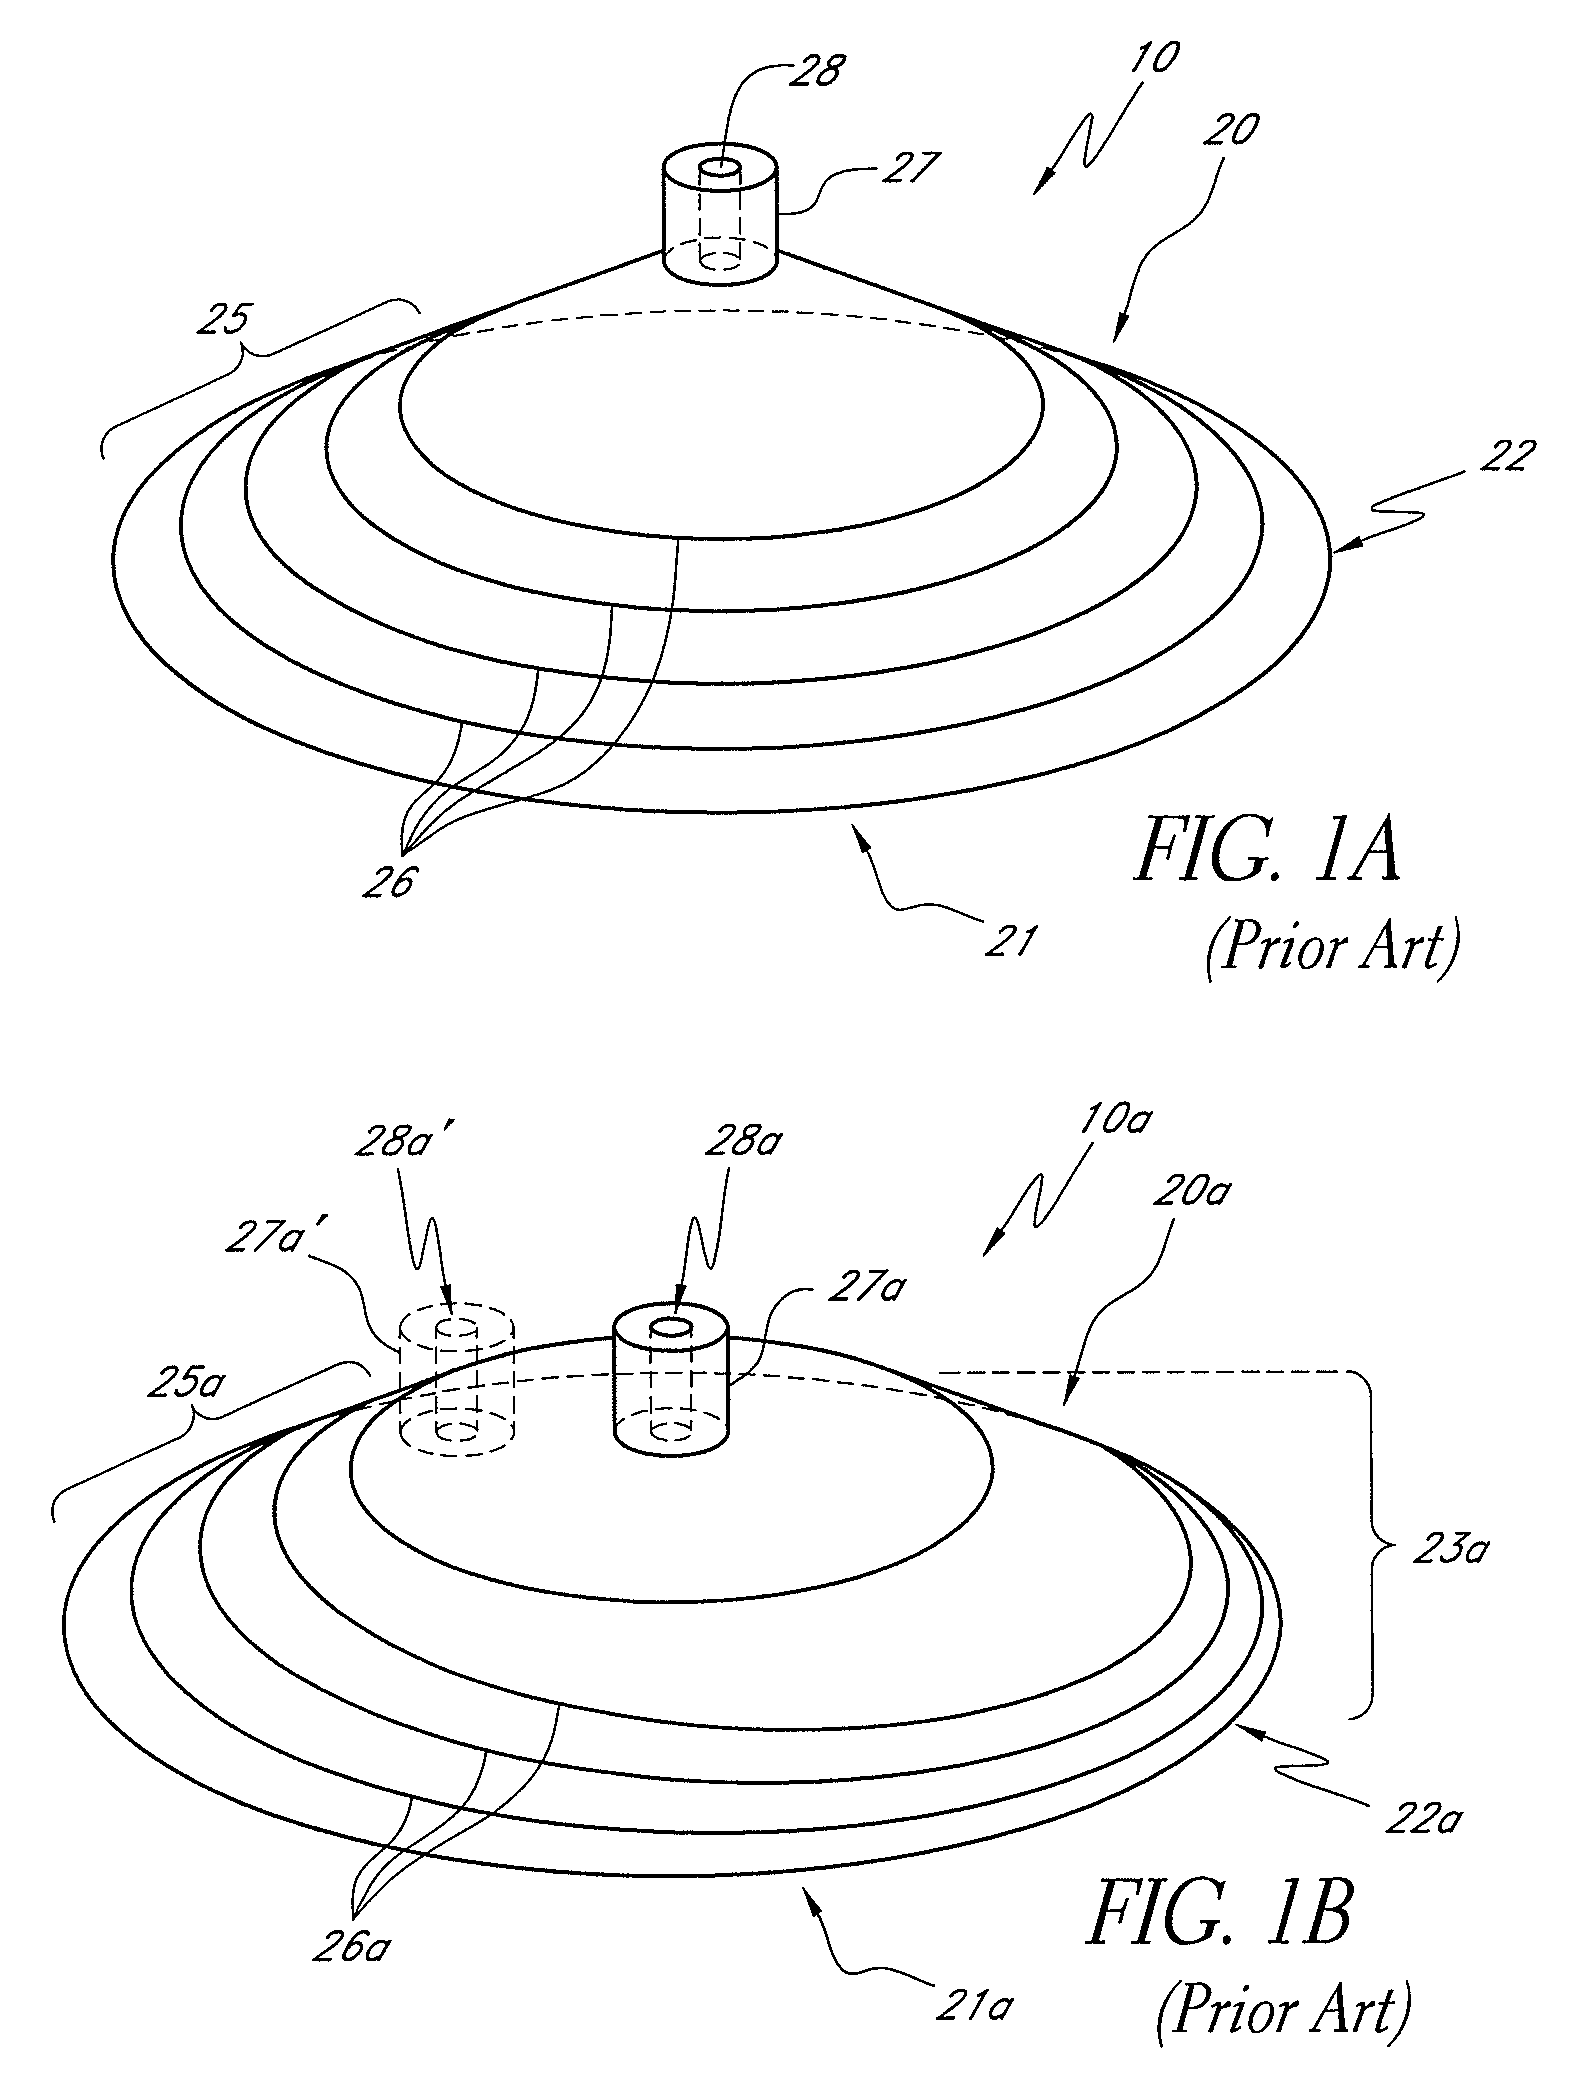 Wound overlay with cuff for wound treatment employing reduced pressure